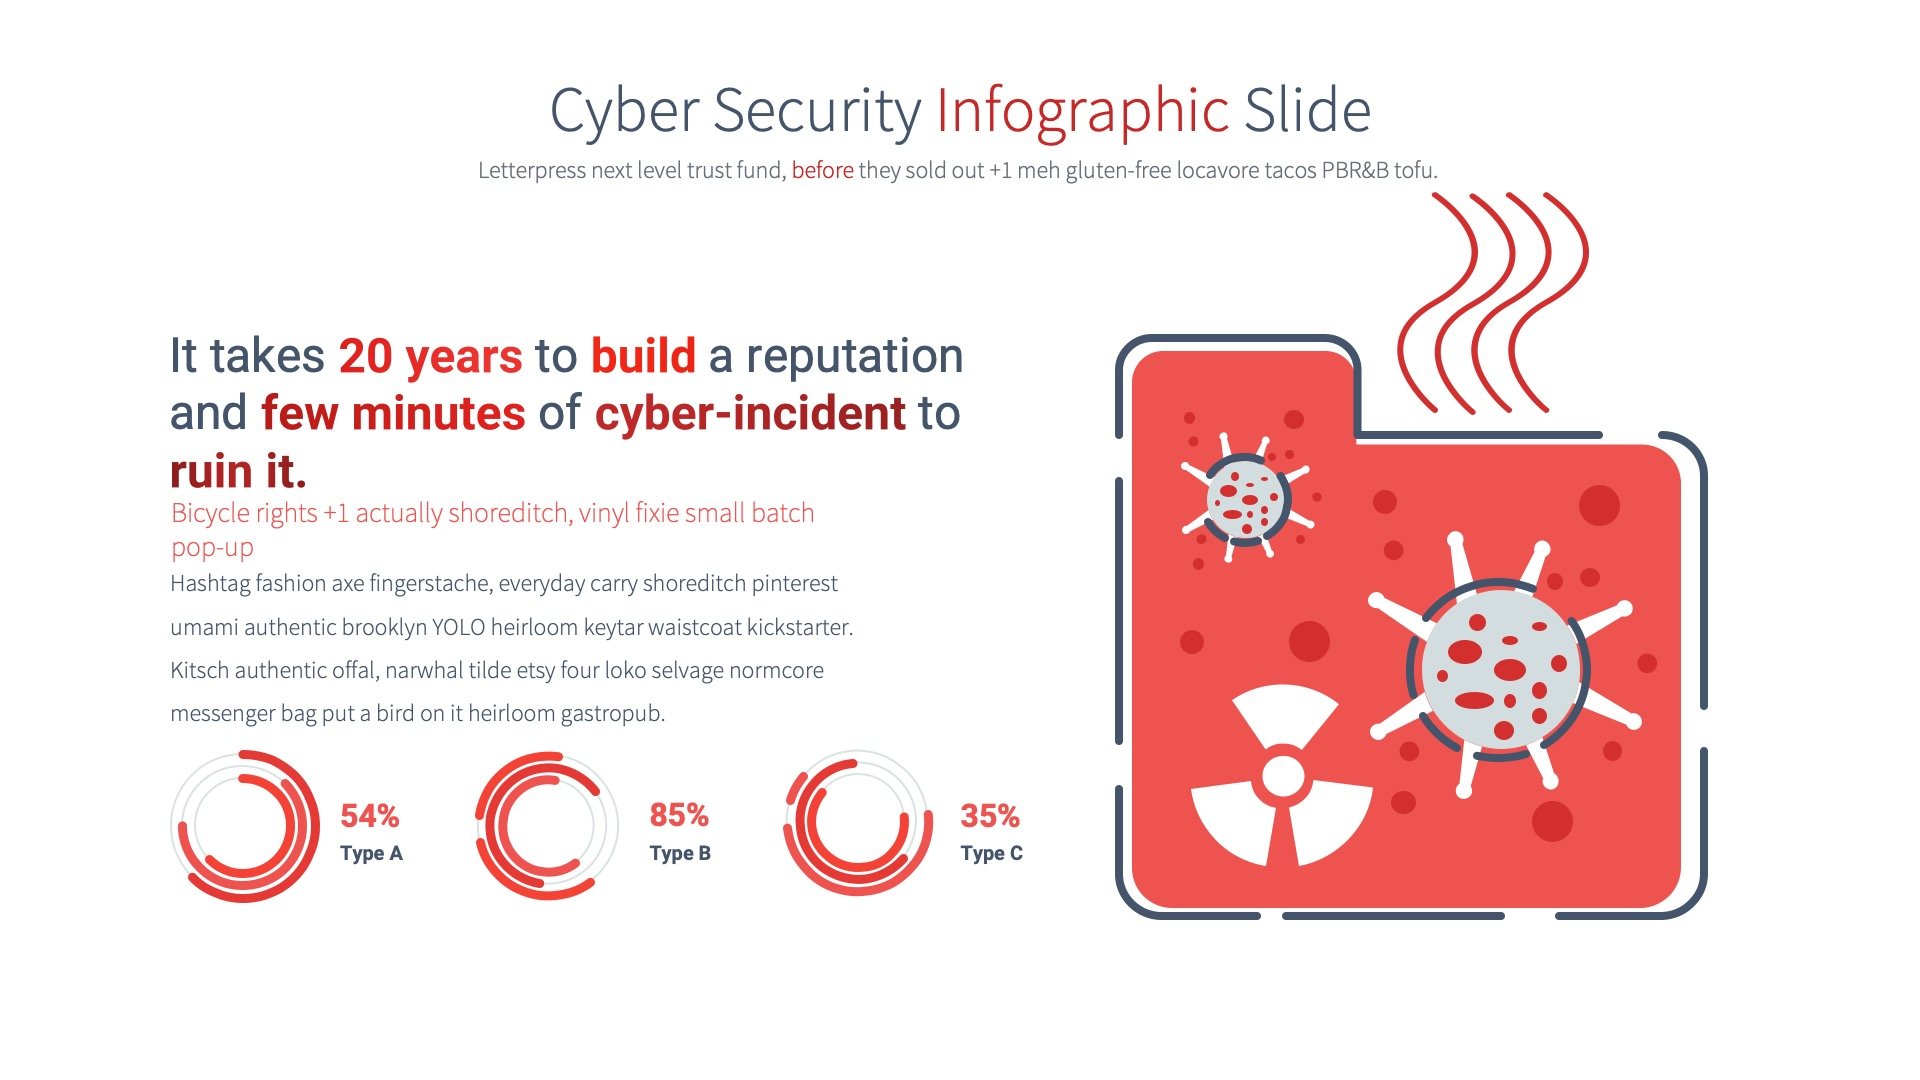 Cyber security infographic slide.